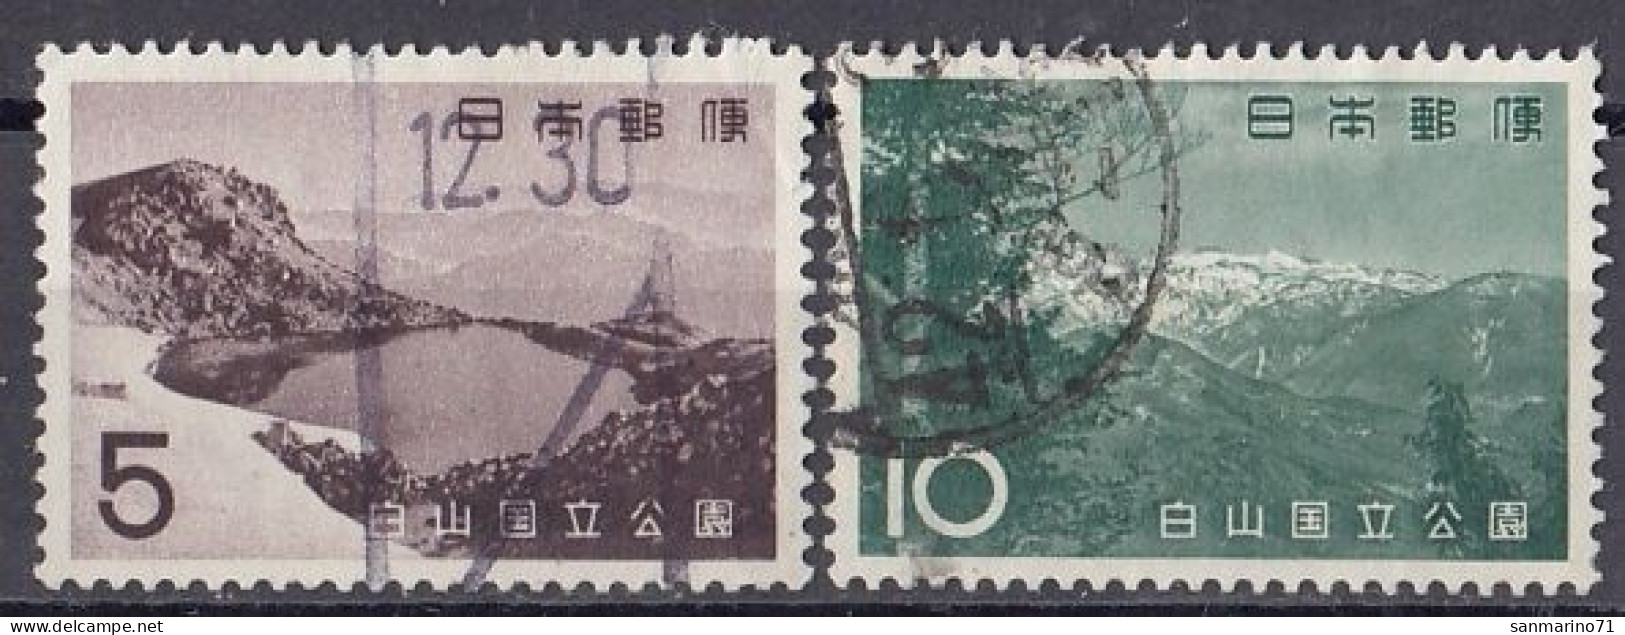 JAPAN 817-818,used - Mountains